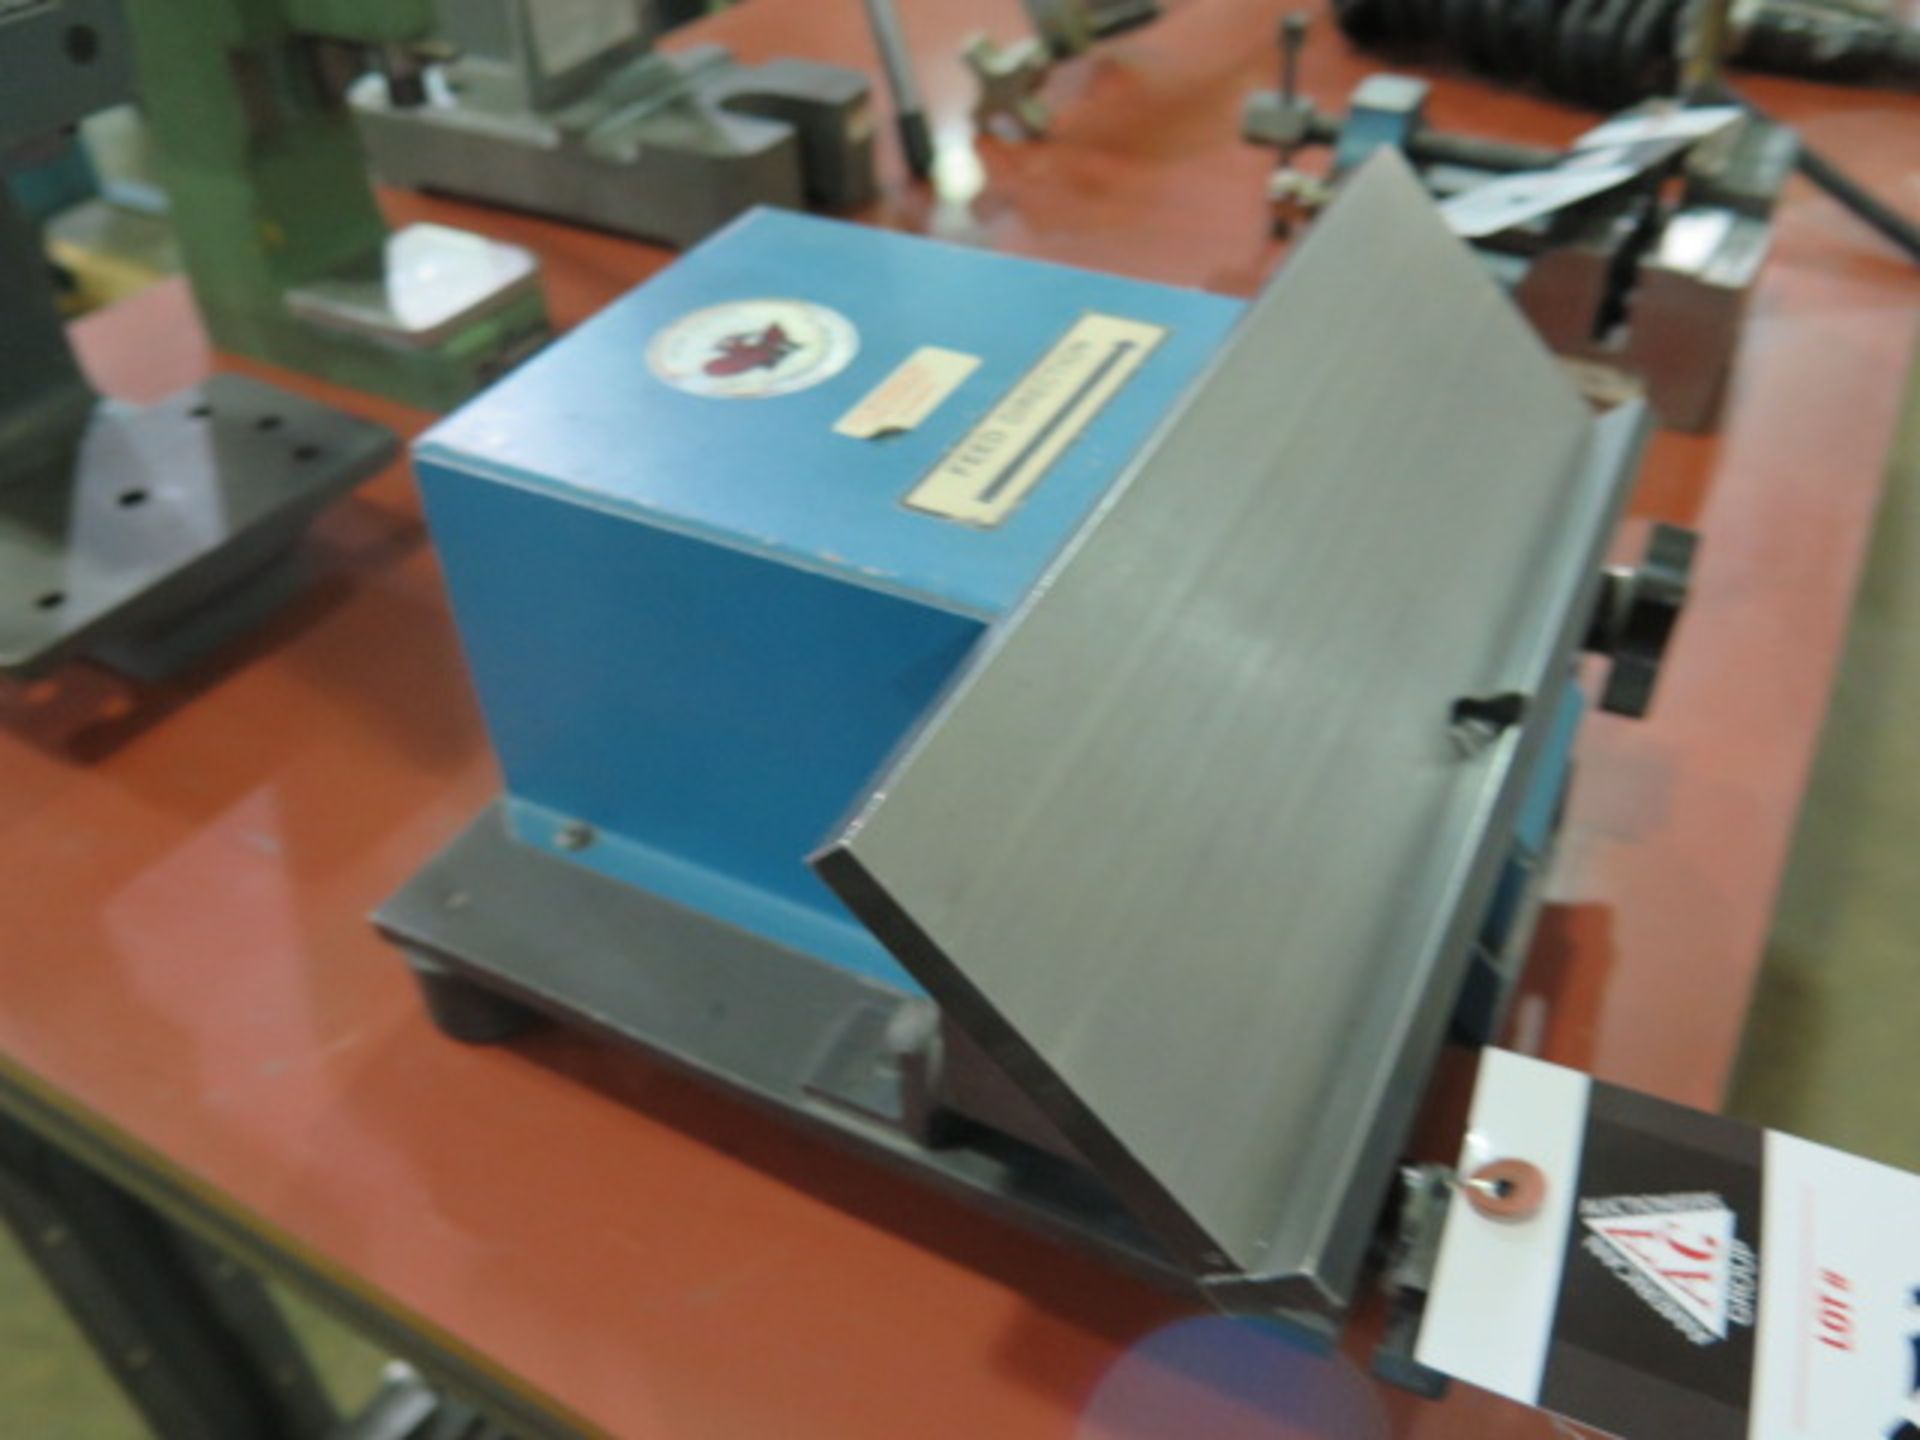 Simco BB-920 "Bur-Beaver" Deburring and Beveling Machine s/n 90375 (SOLD AS-IS - NO WARRANTY) - Image 3 of 6